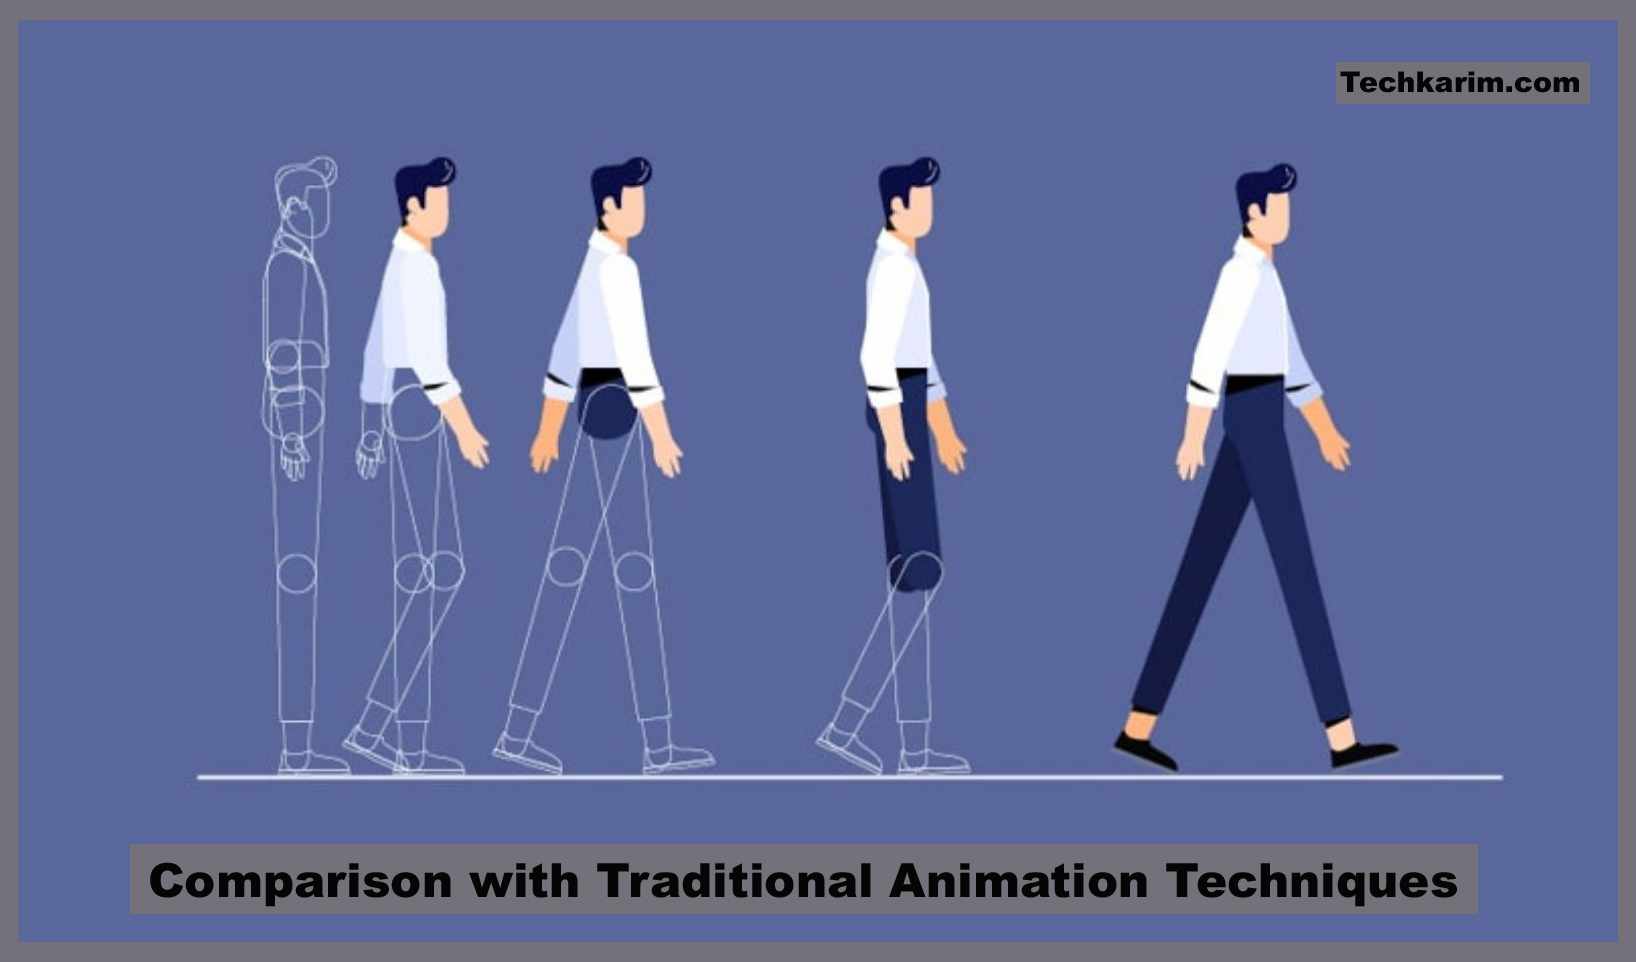 Comparison with Traditional Animation Techniques